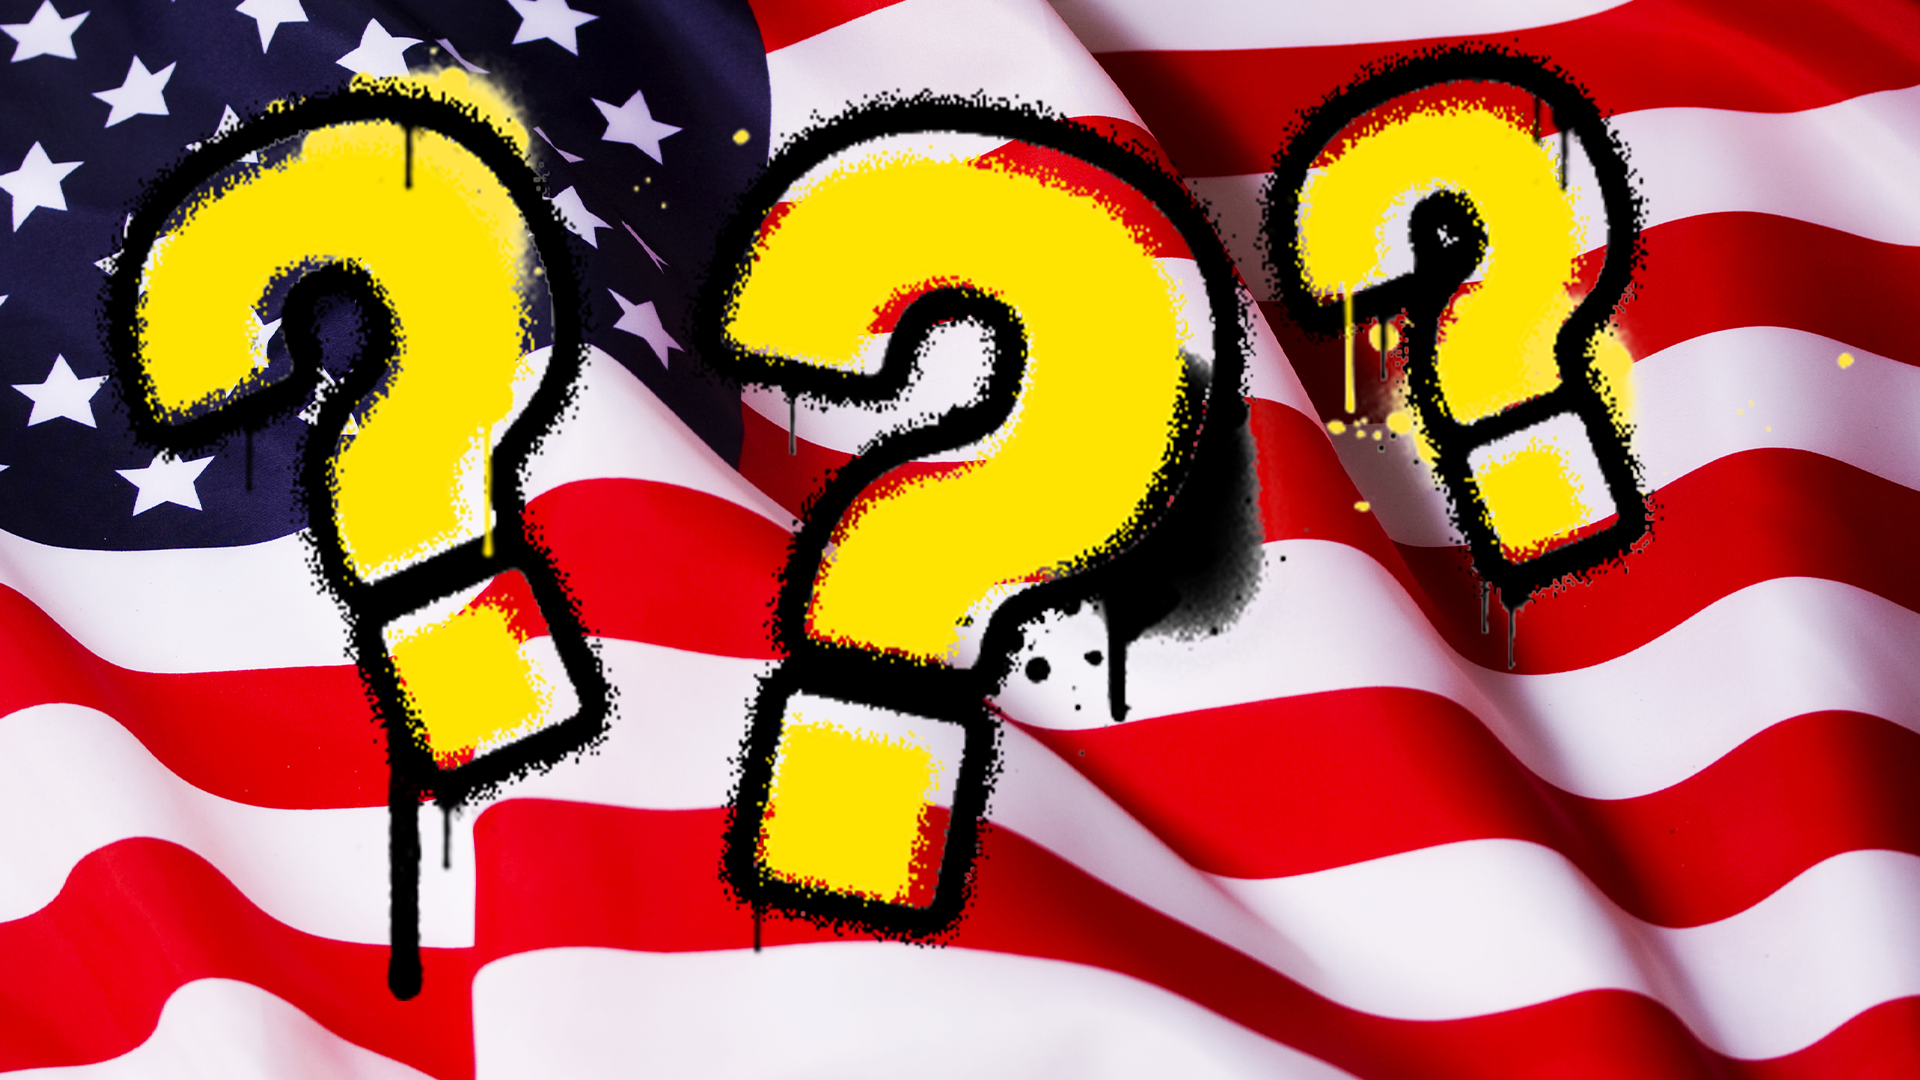 US flag with question marks